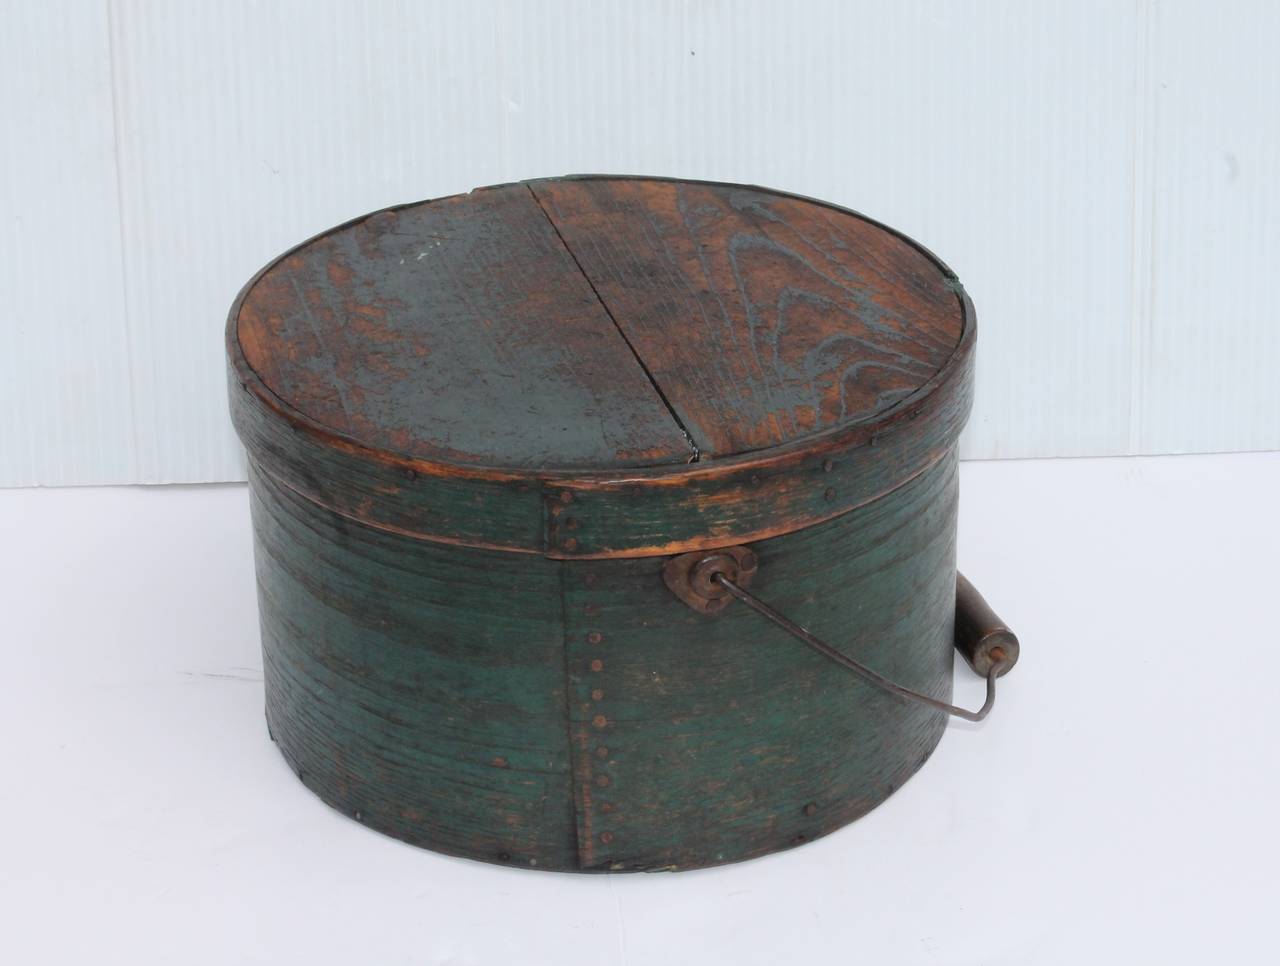 This New England original Windsor green 19th century pantry box is quite early and in great condition. Minor wear consistent with age and use. Wear to the top with some paint loss from age. Great condition. This over sized pantry was found in the